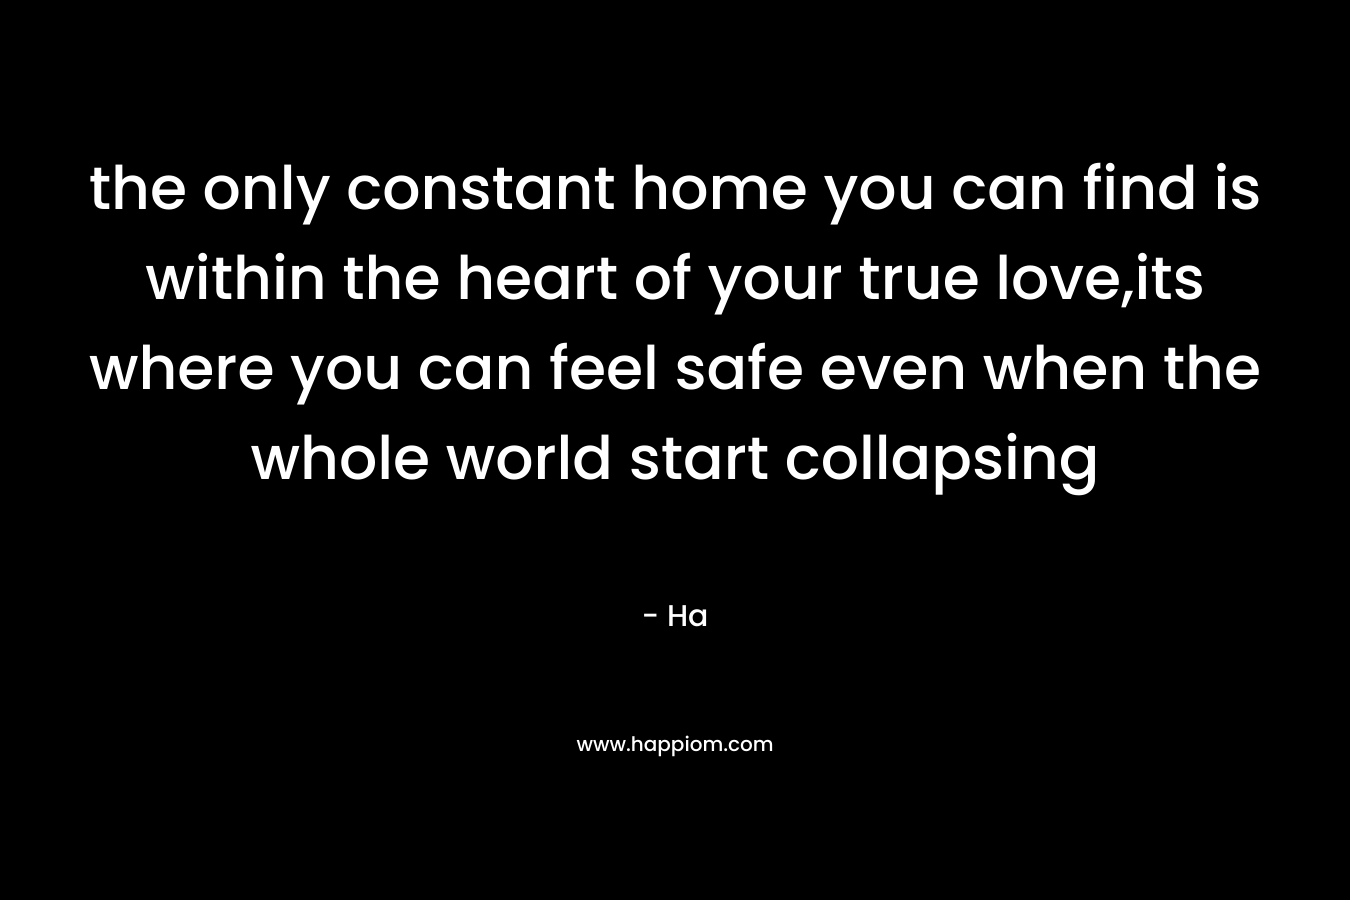 the only constant home you can find is within the heart of your true love,its where you can feel safe even when the whole world start collapsing